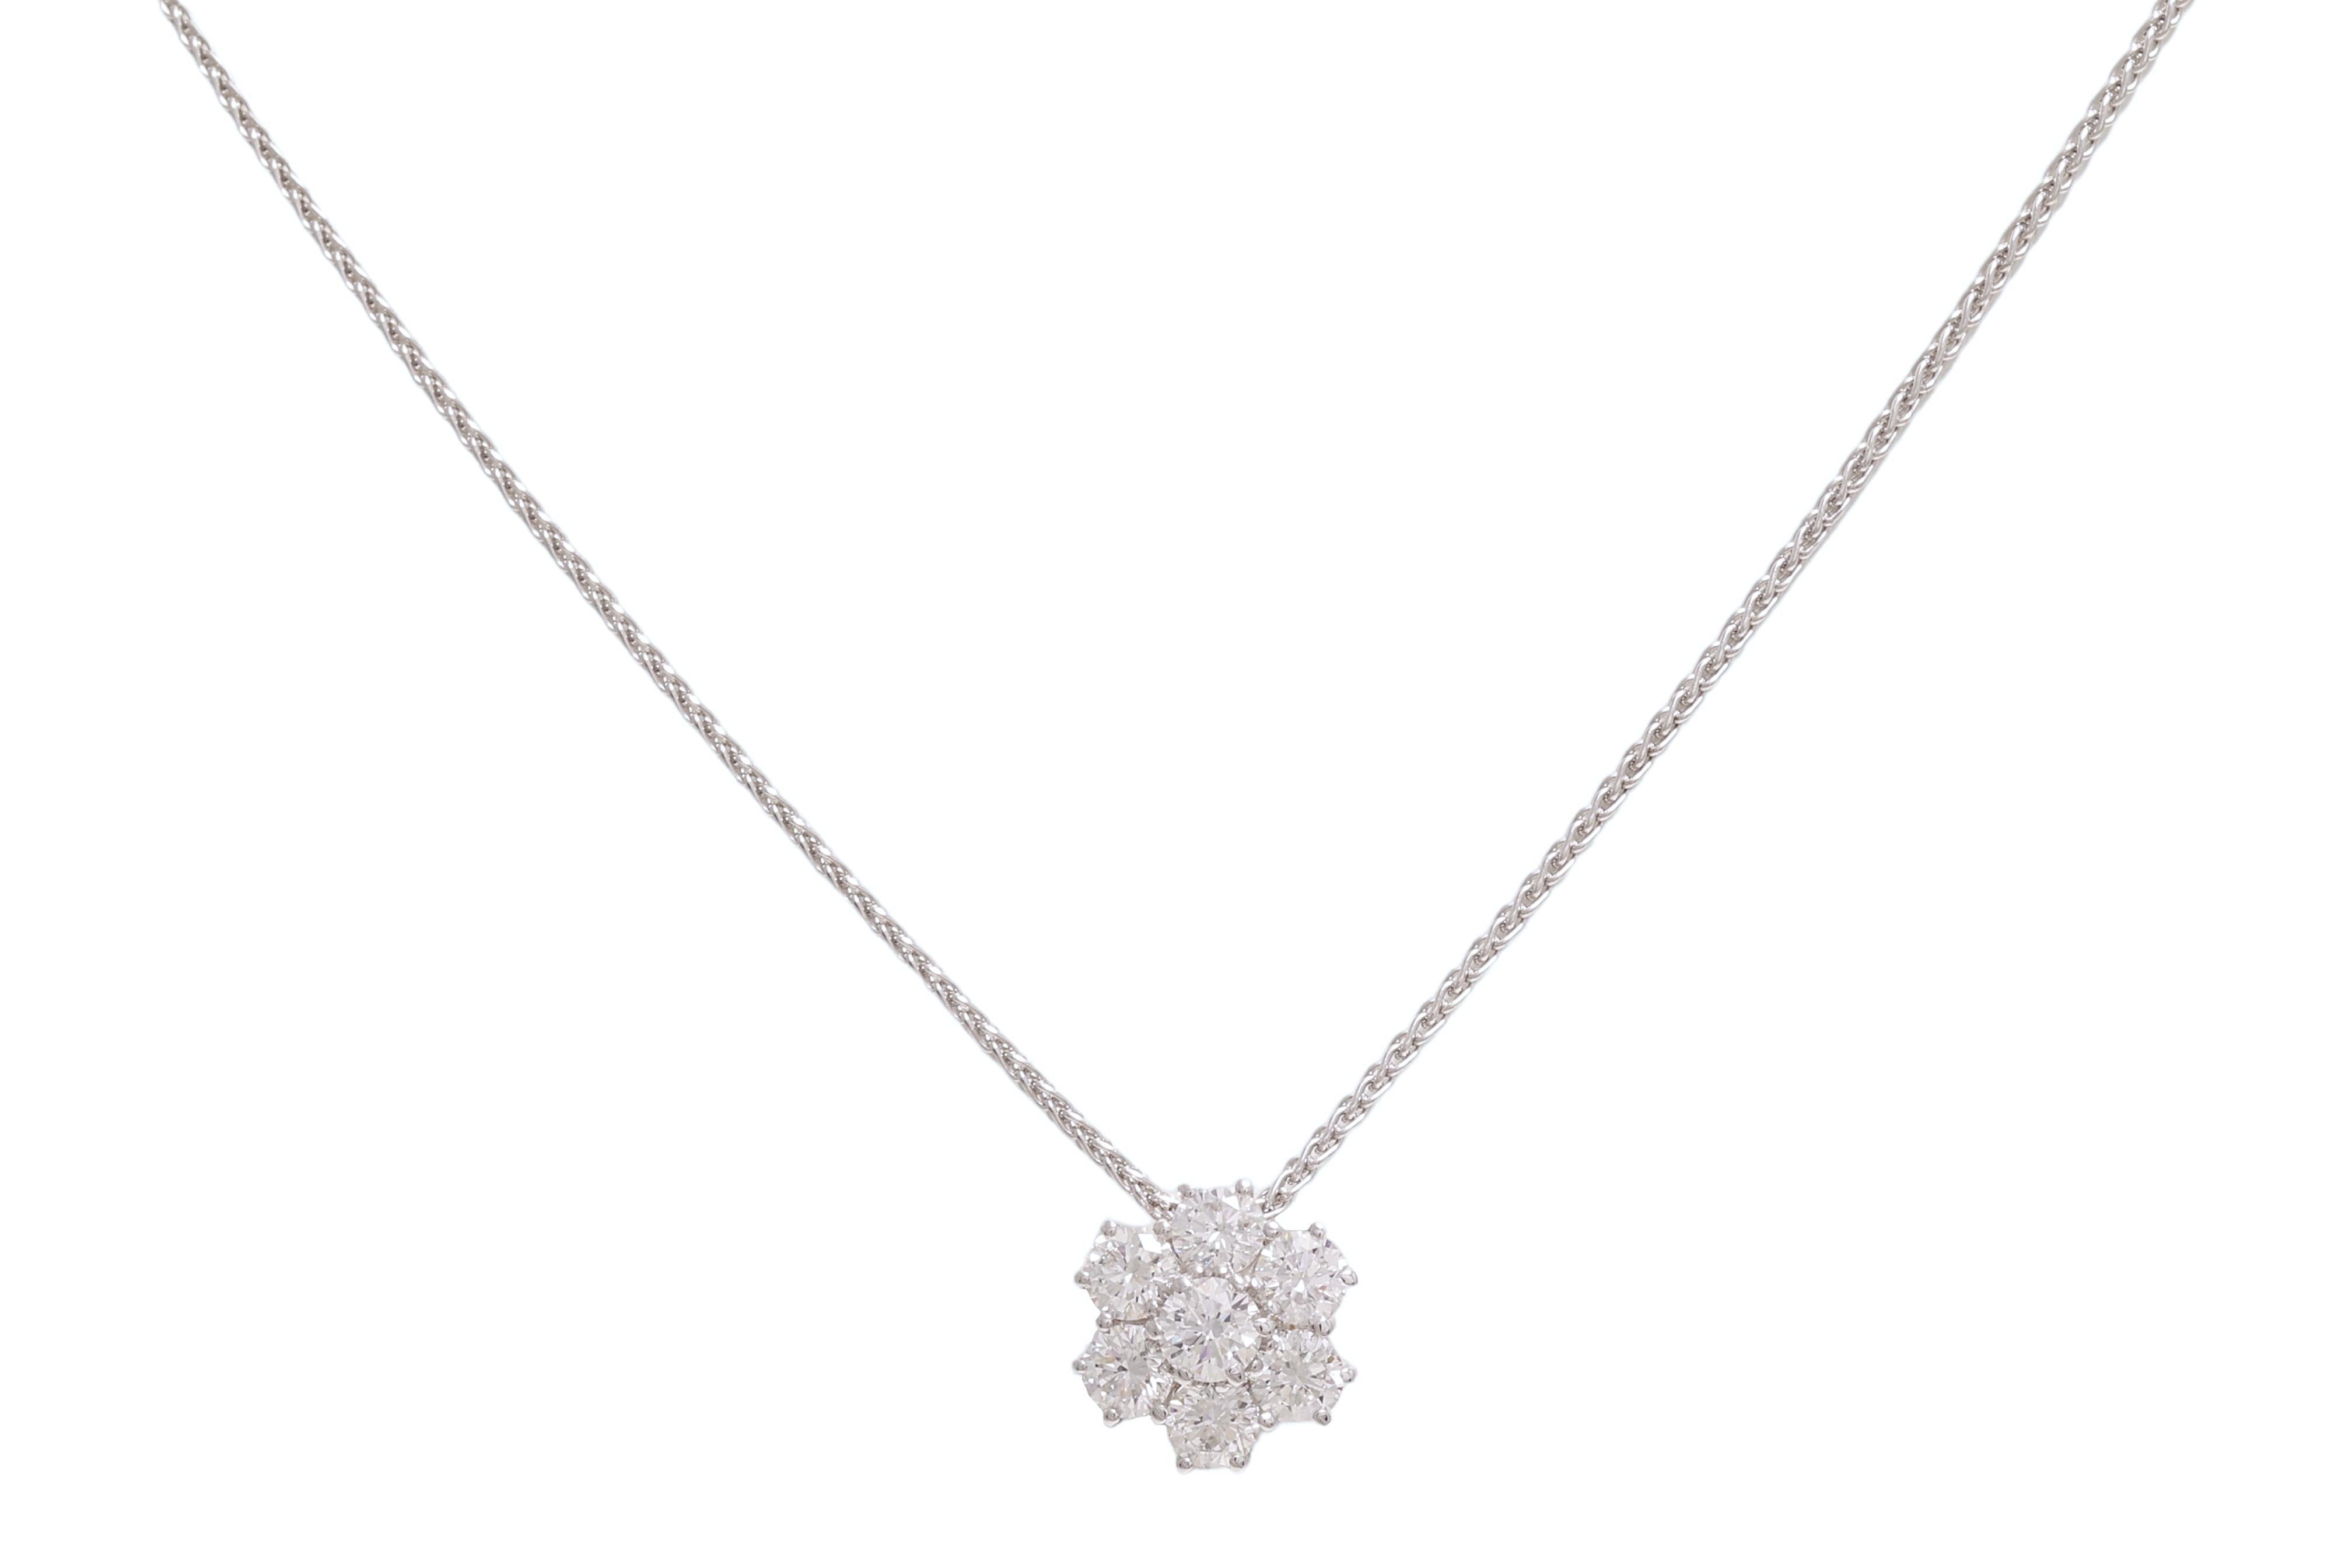 Timeless yet Gorgeous 18 kt. White Gold Necklace Pendant with 1.13 ct. Diamonds 

Diamonds: 7 brilliant cut diamonds together 1.13 ct. F/G VS

Material: 18 kt white gold

Measurements: pendant diameter 10 mm
Necklace length: 42 cm with eye to  make